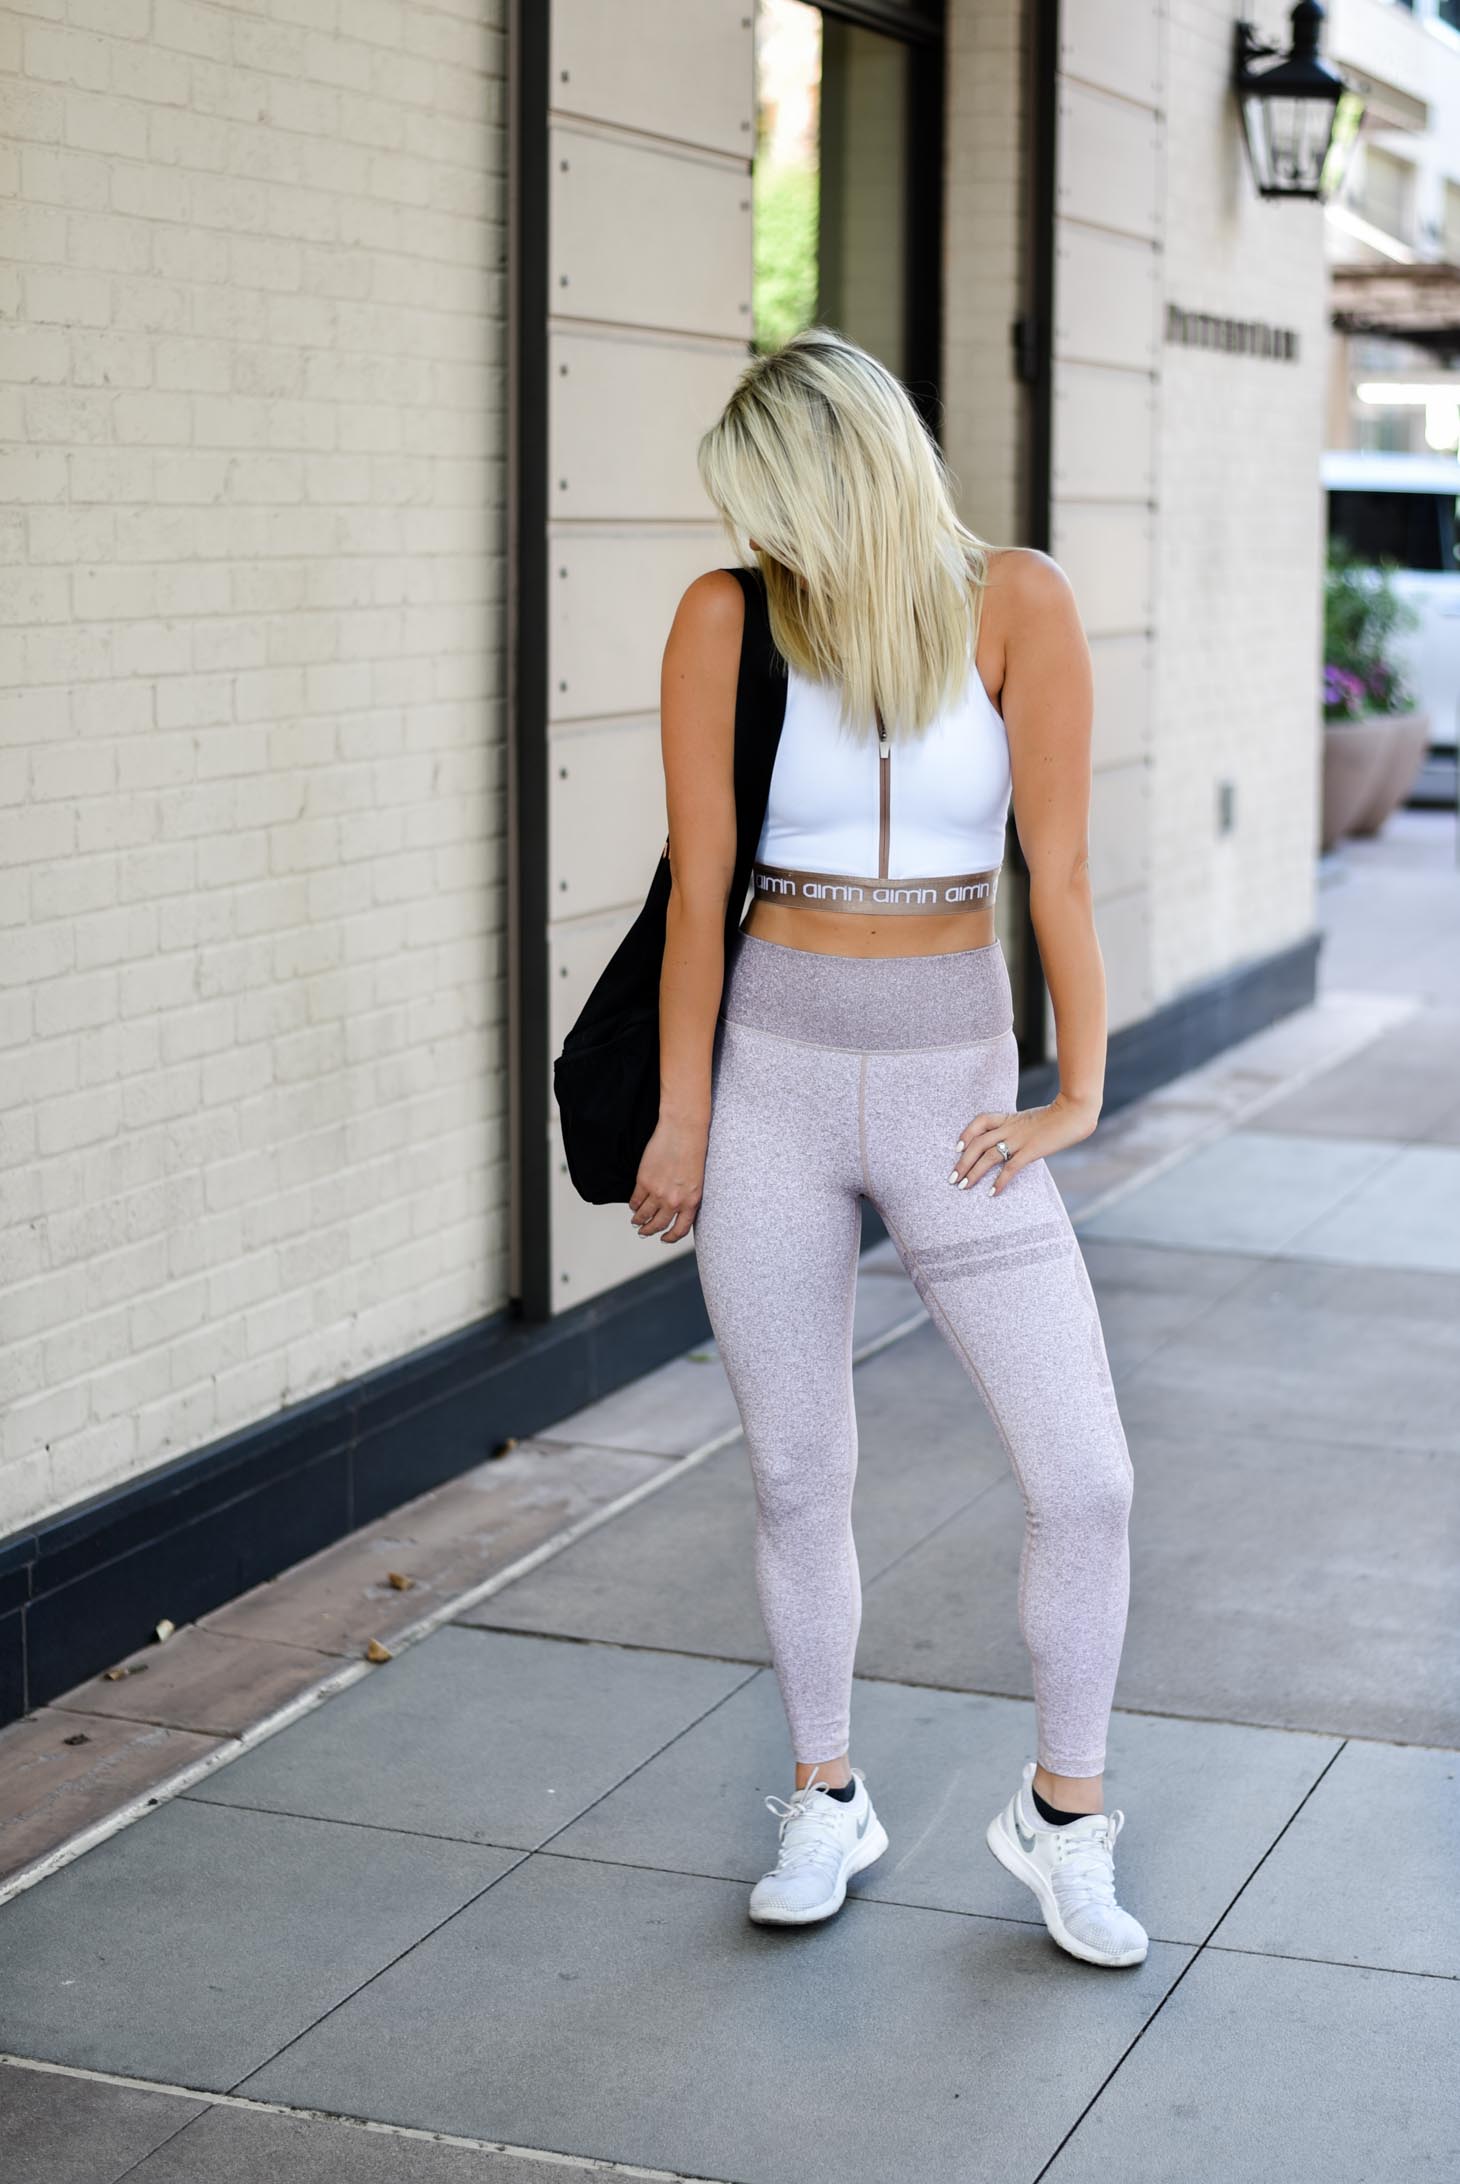 Erin Elizabeth of Wink and a Twirl shares this Aimn Athleisure Look for Workout Style Inspiration 